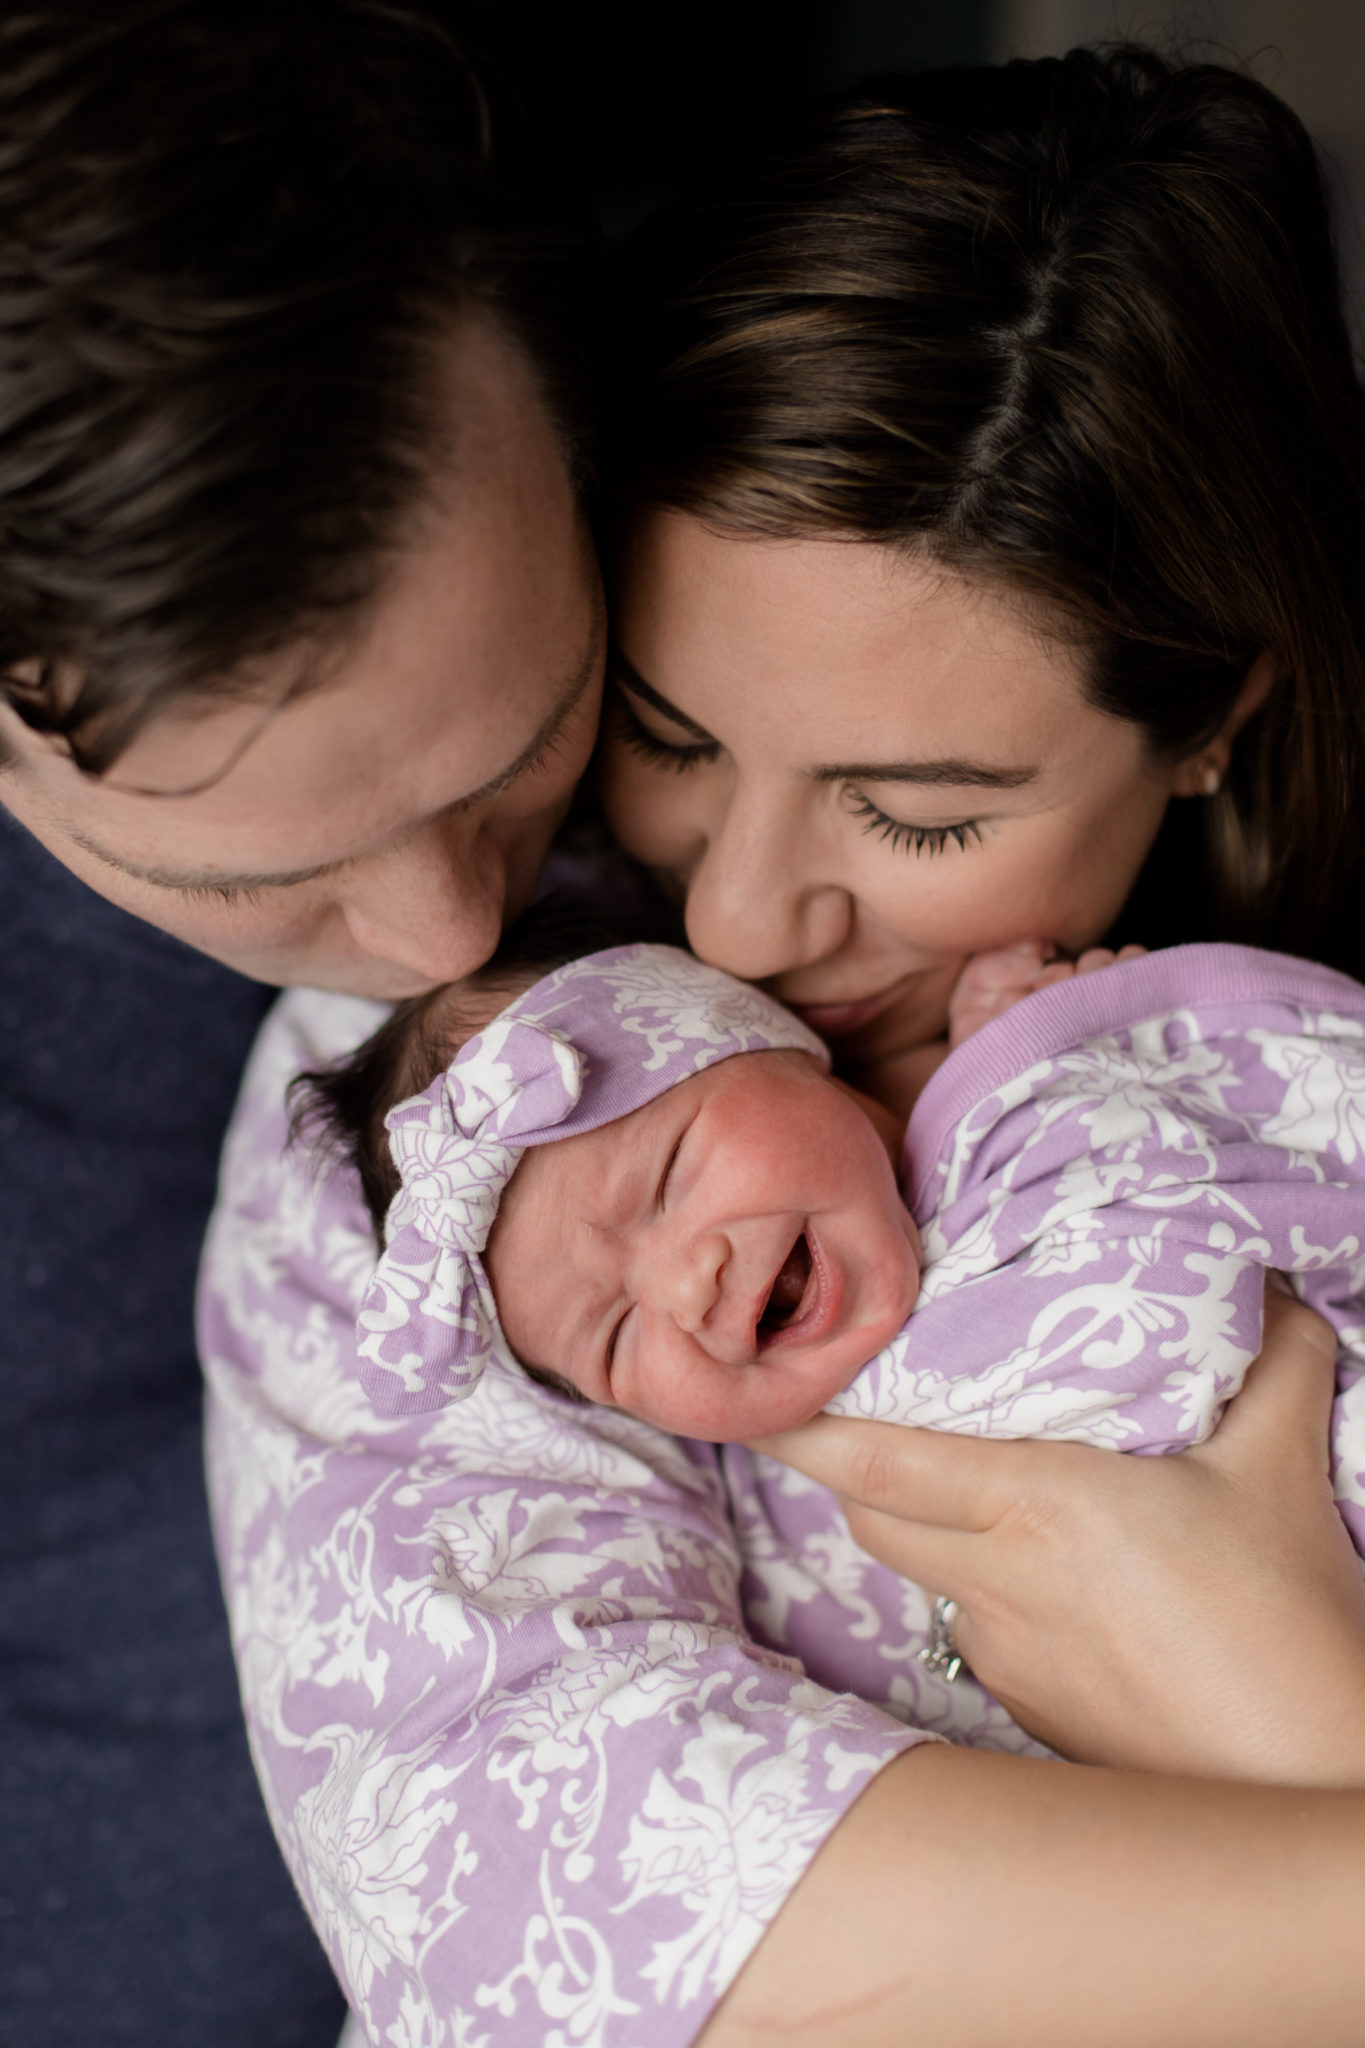 Baby Girl Birth Story: Welcome Sidney Eileen! by popular life and style blog, Glass of Glam: image of a man and woman sitting closely together and holding a newborn baby girl wrapped in purple and white floral print blanket.